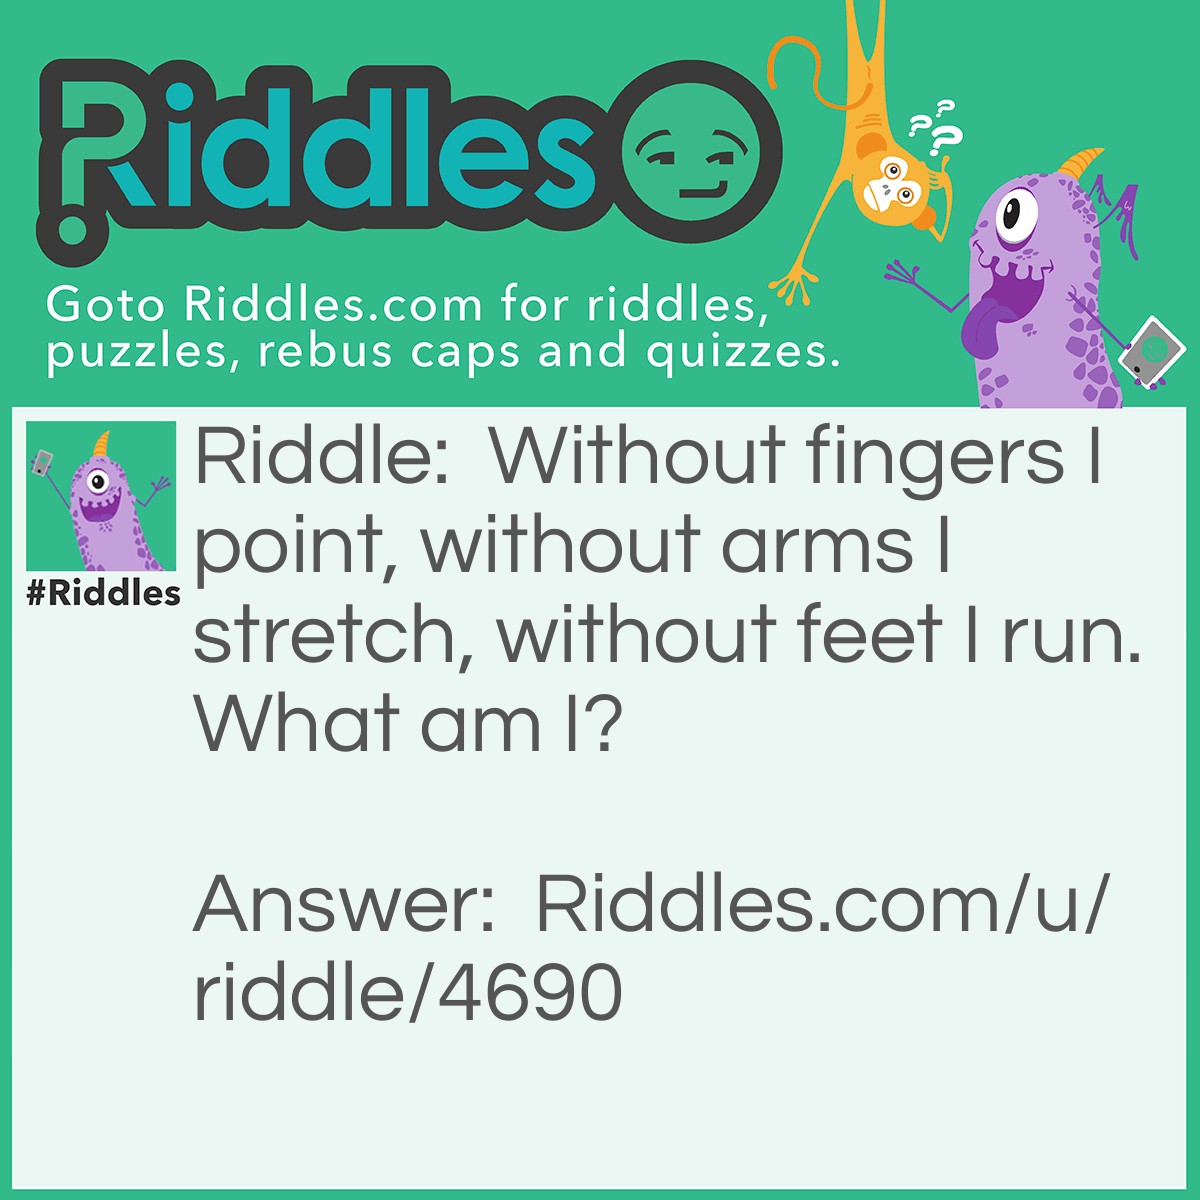 Riddle: Without fingers I point, without arms I stretch, without feet I run. What am I? Answer: A clock.